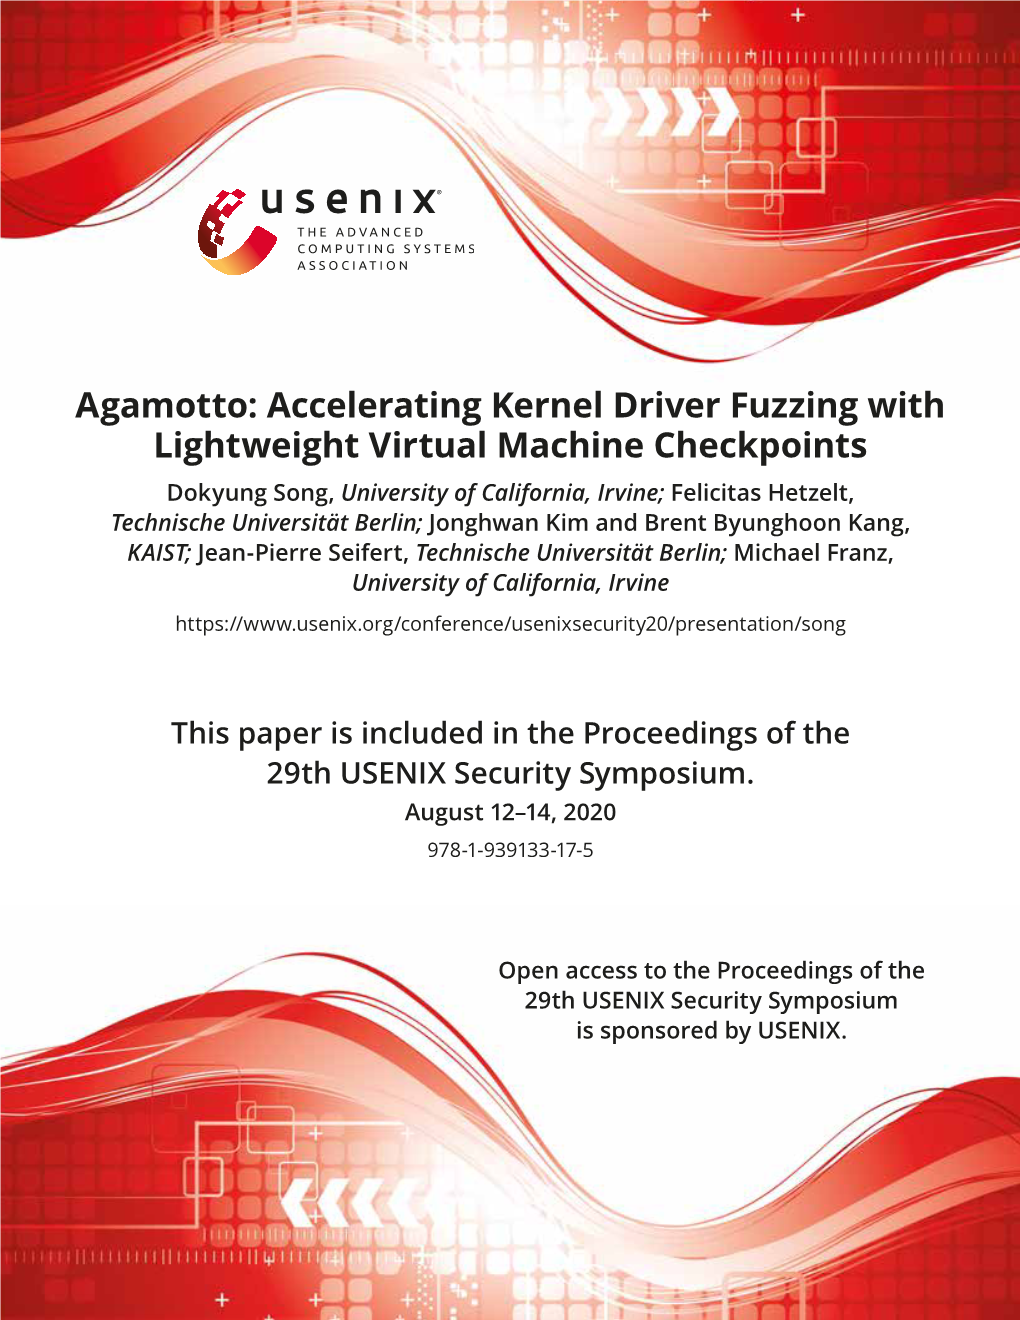 Accelerating Kernel Driver Fuzzing with Lightweight Virtual